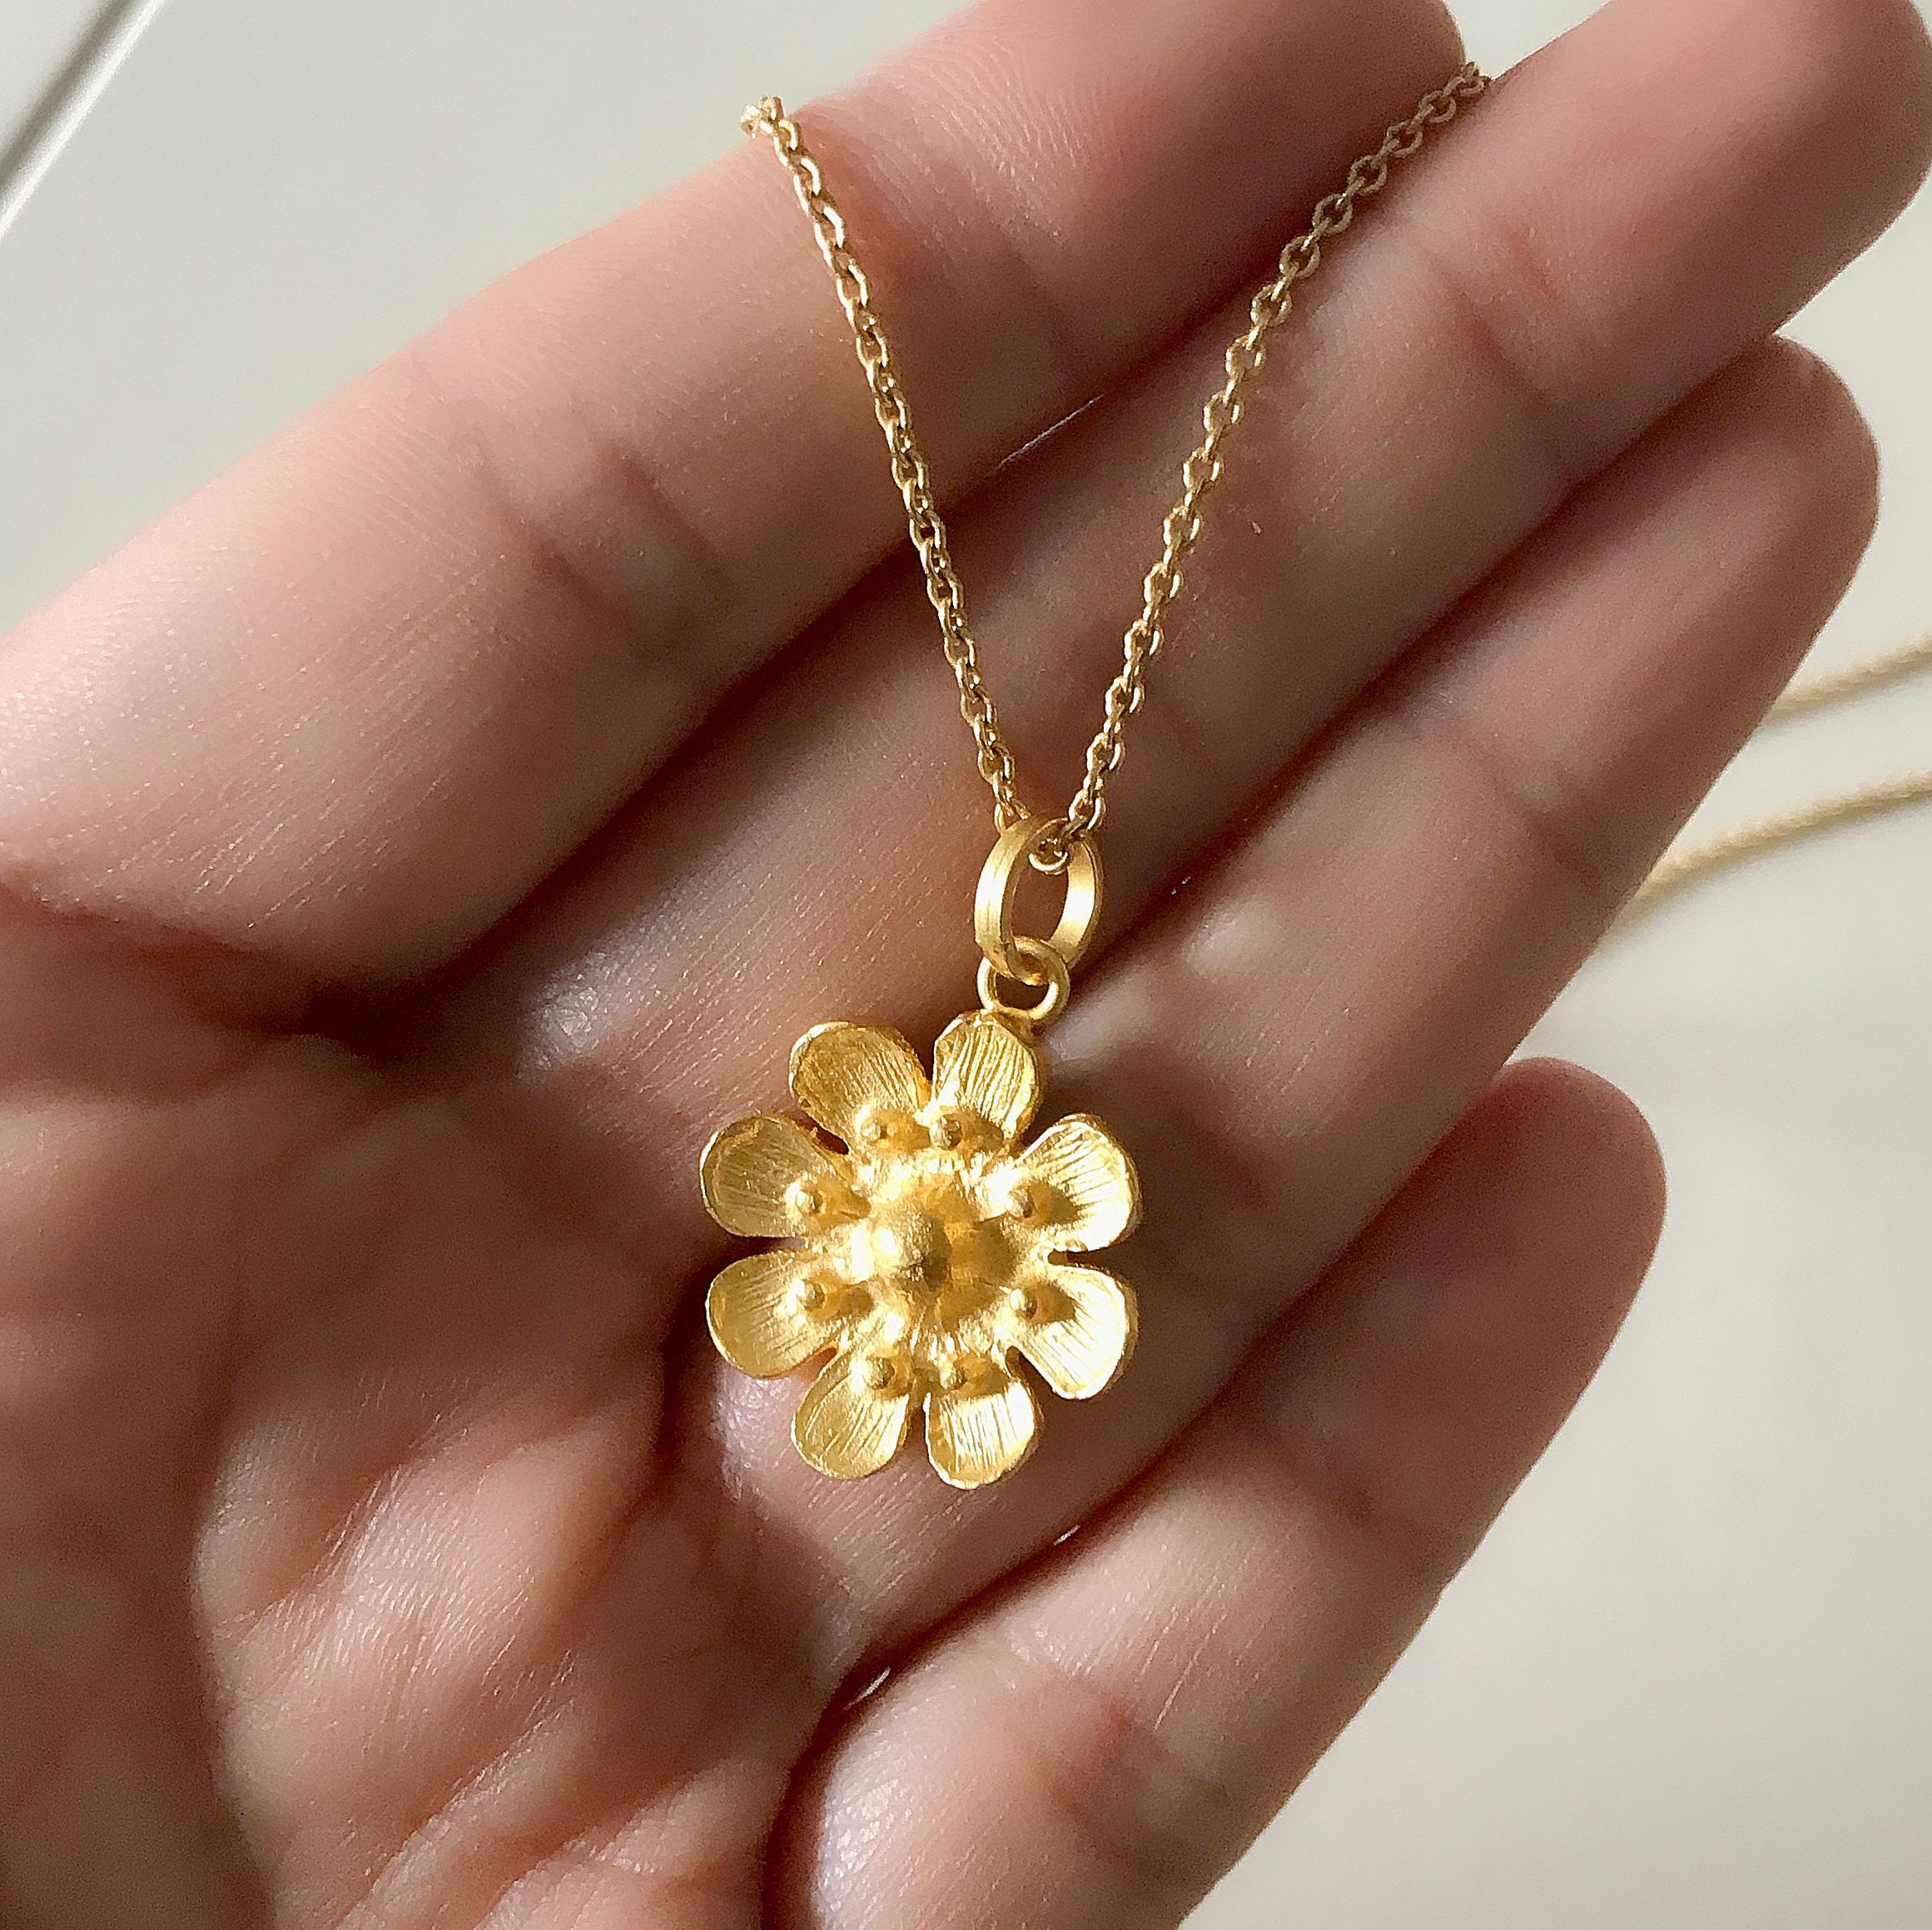 Women's 18 Karat Solid Yellow Gold Satin Finish Flower Pendant Chain Necklace For Sale